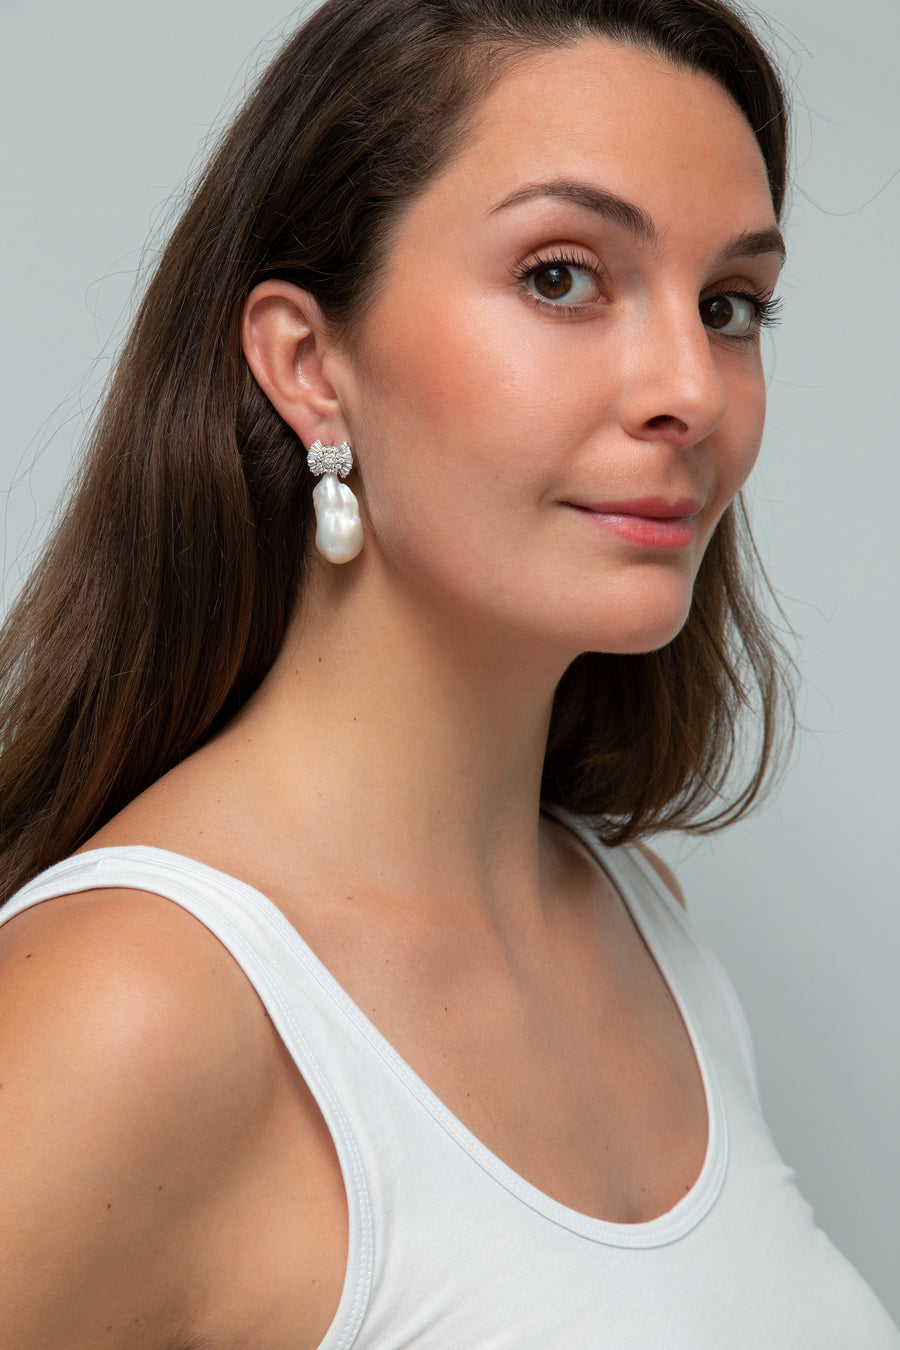 Sparkly Firework Drop Earring with Baroque Pearl